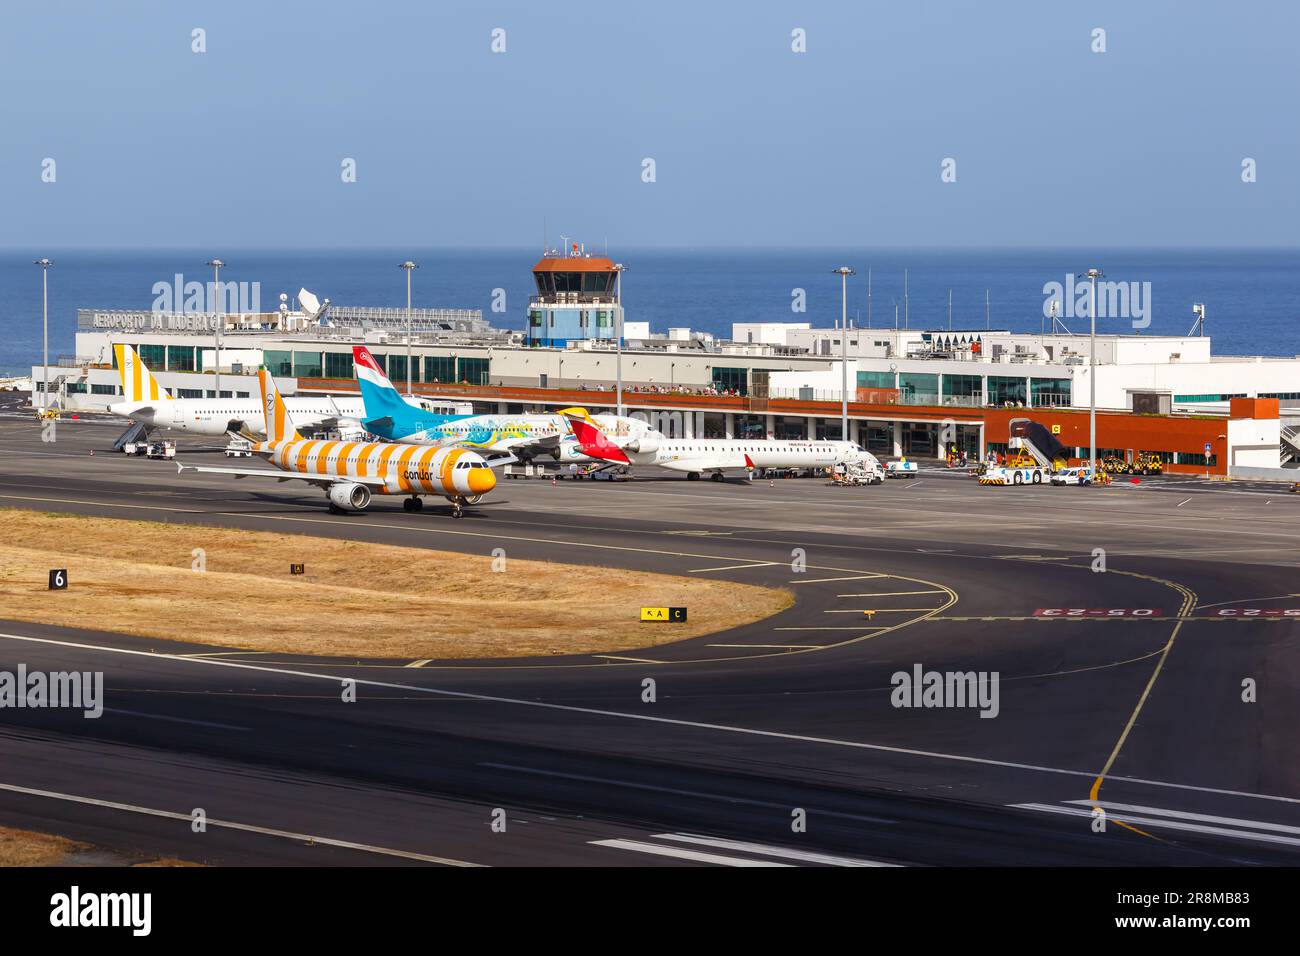 Madeira, Portugal - September 12, 2022: Airplanes at Madeira Airport (FNC) in Portugal. Stock Photo